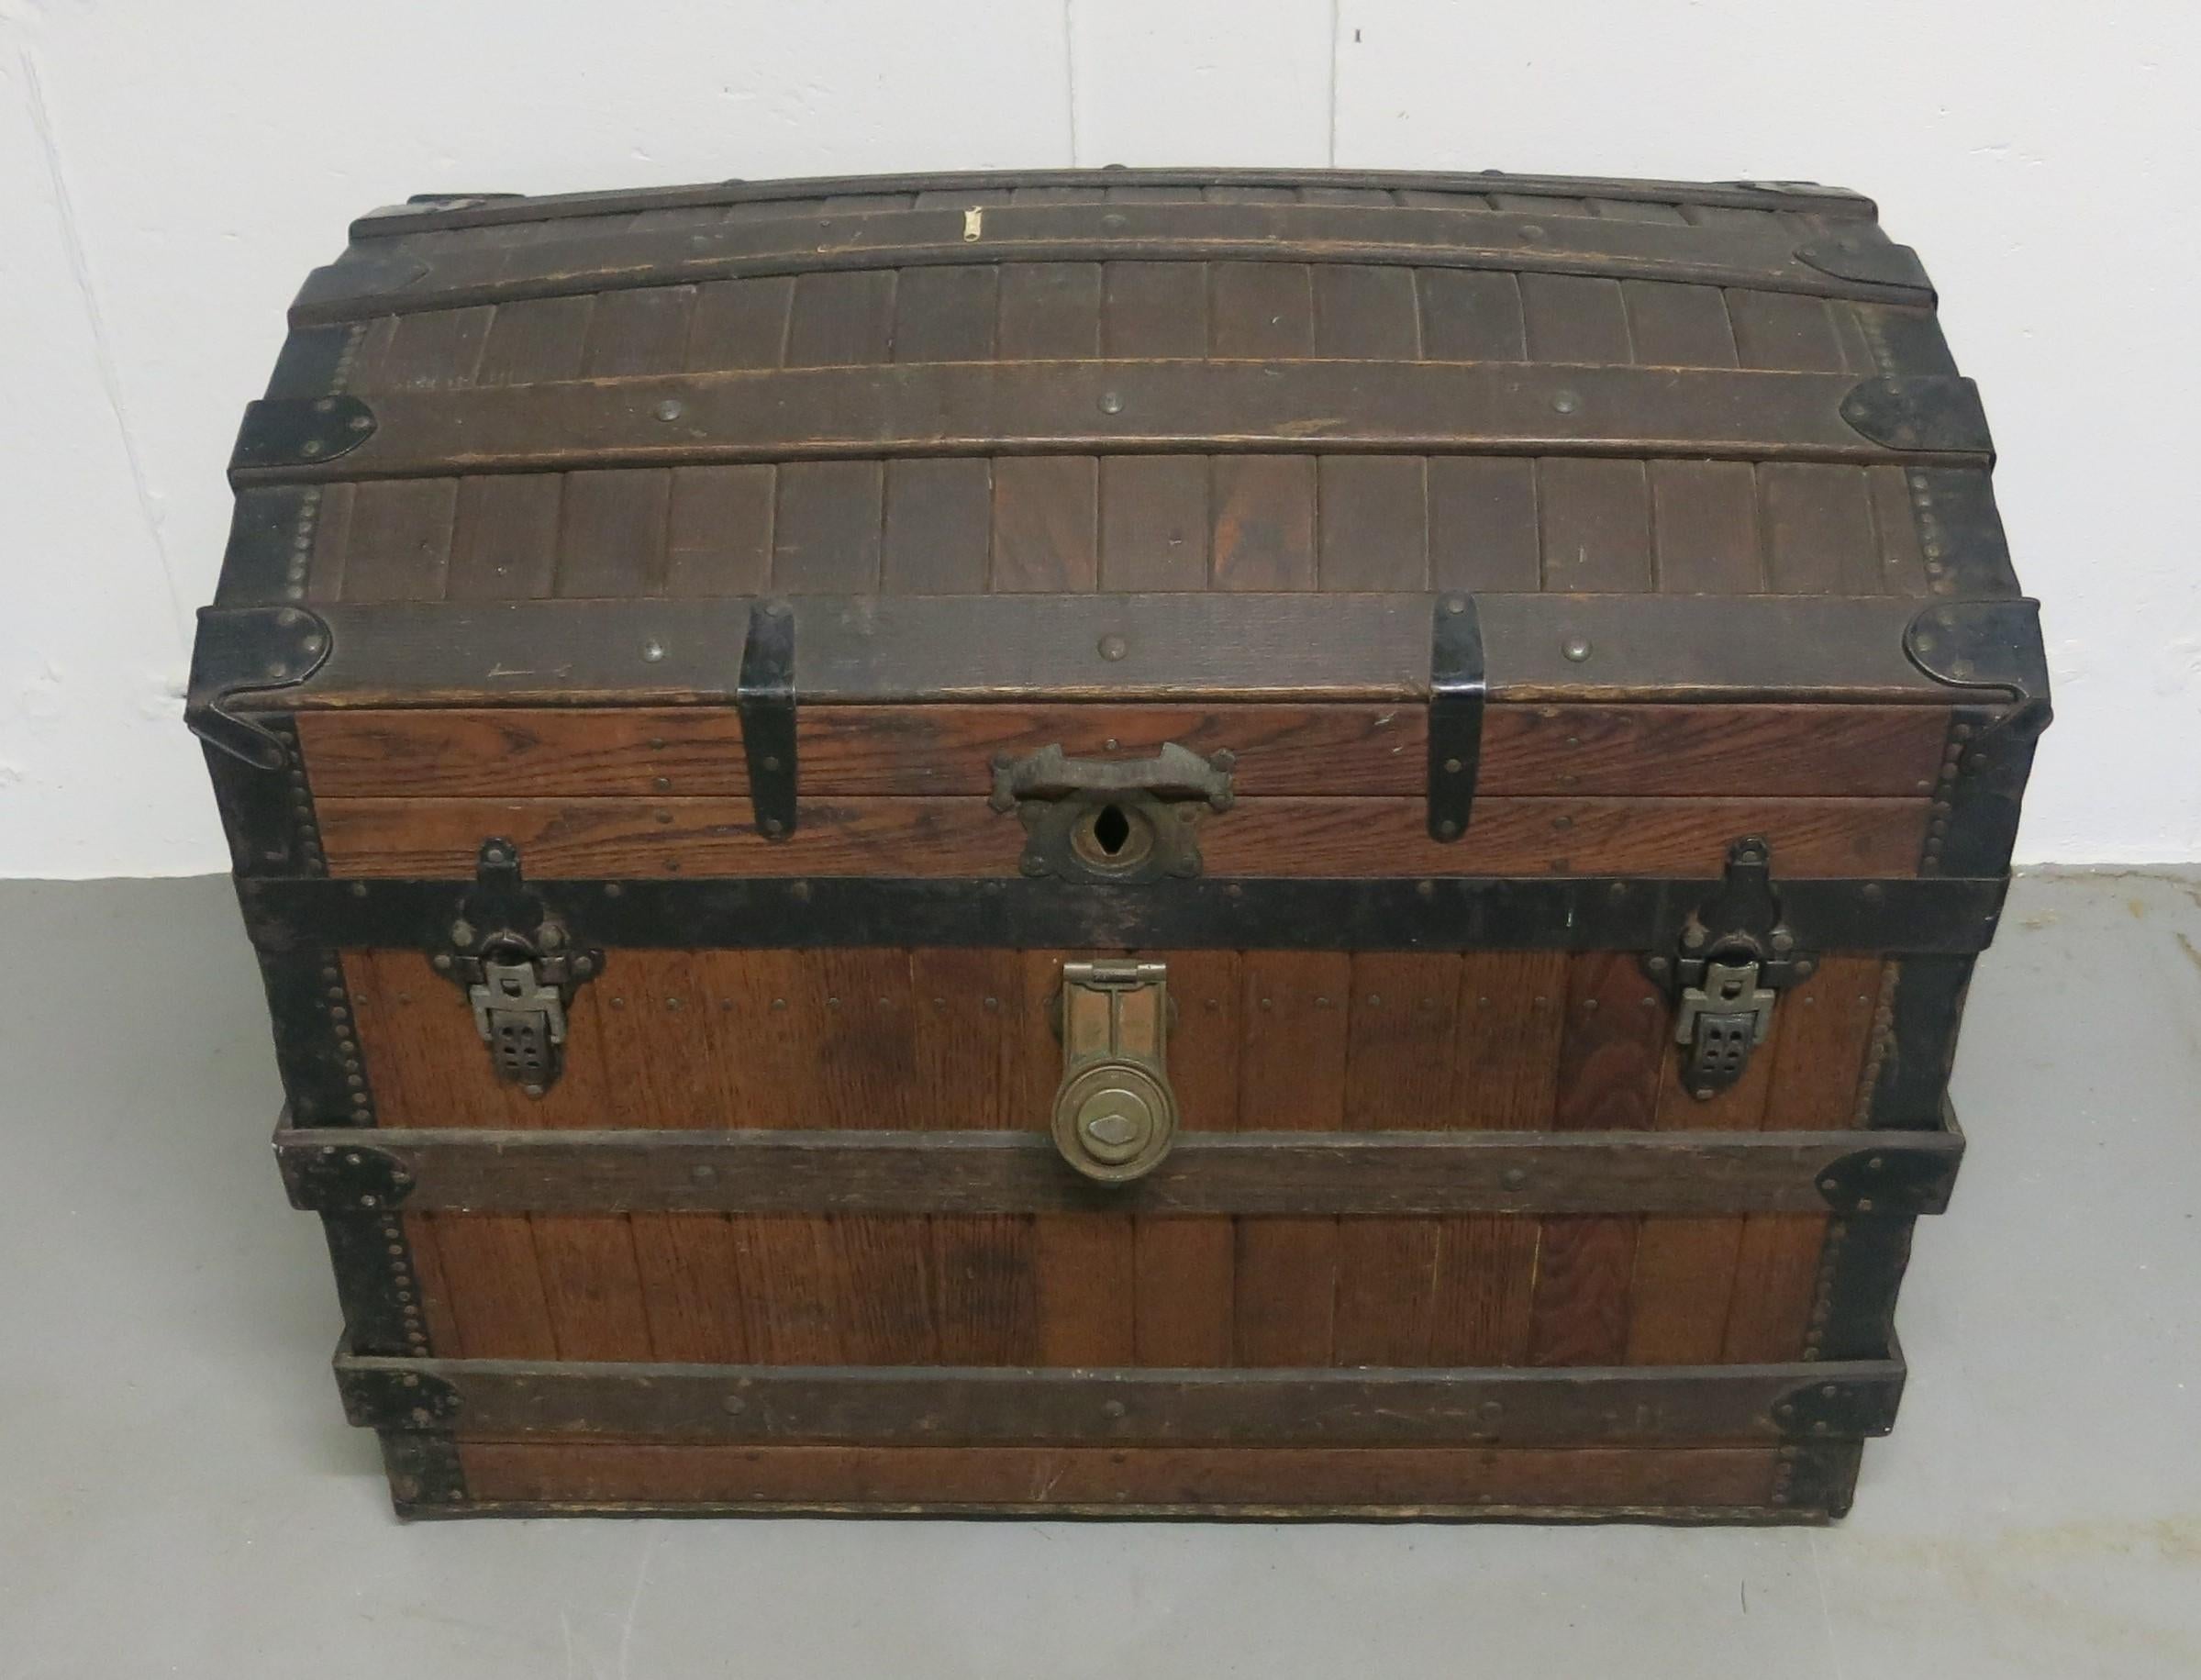 Excelsior slatted oak trunk patent date 1868. Clean exterior with original trays and handles. Interior all there but tops are unattached. Measures: It is 30.5